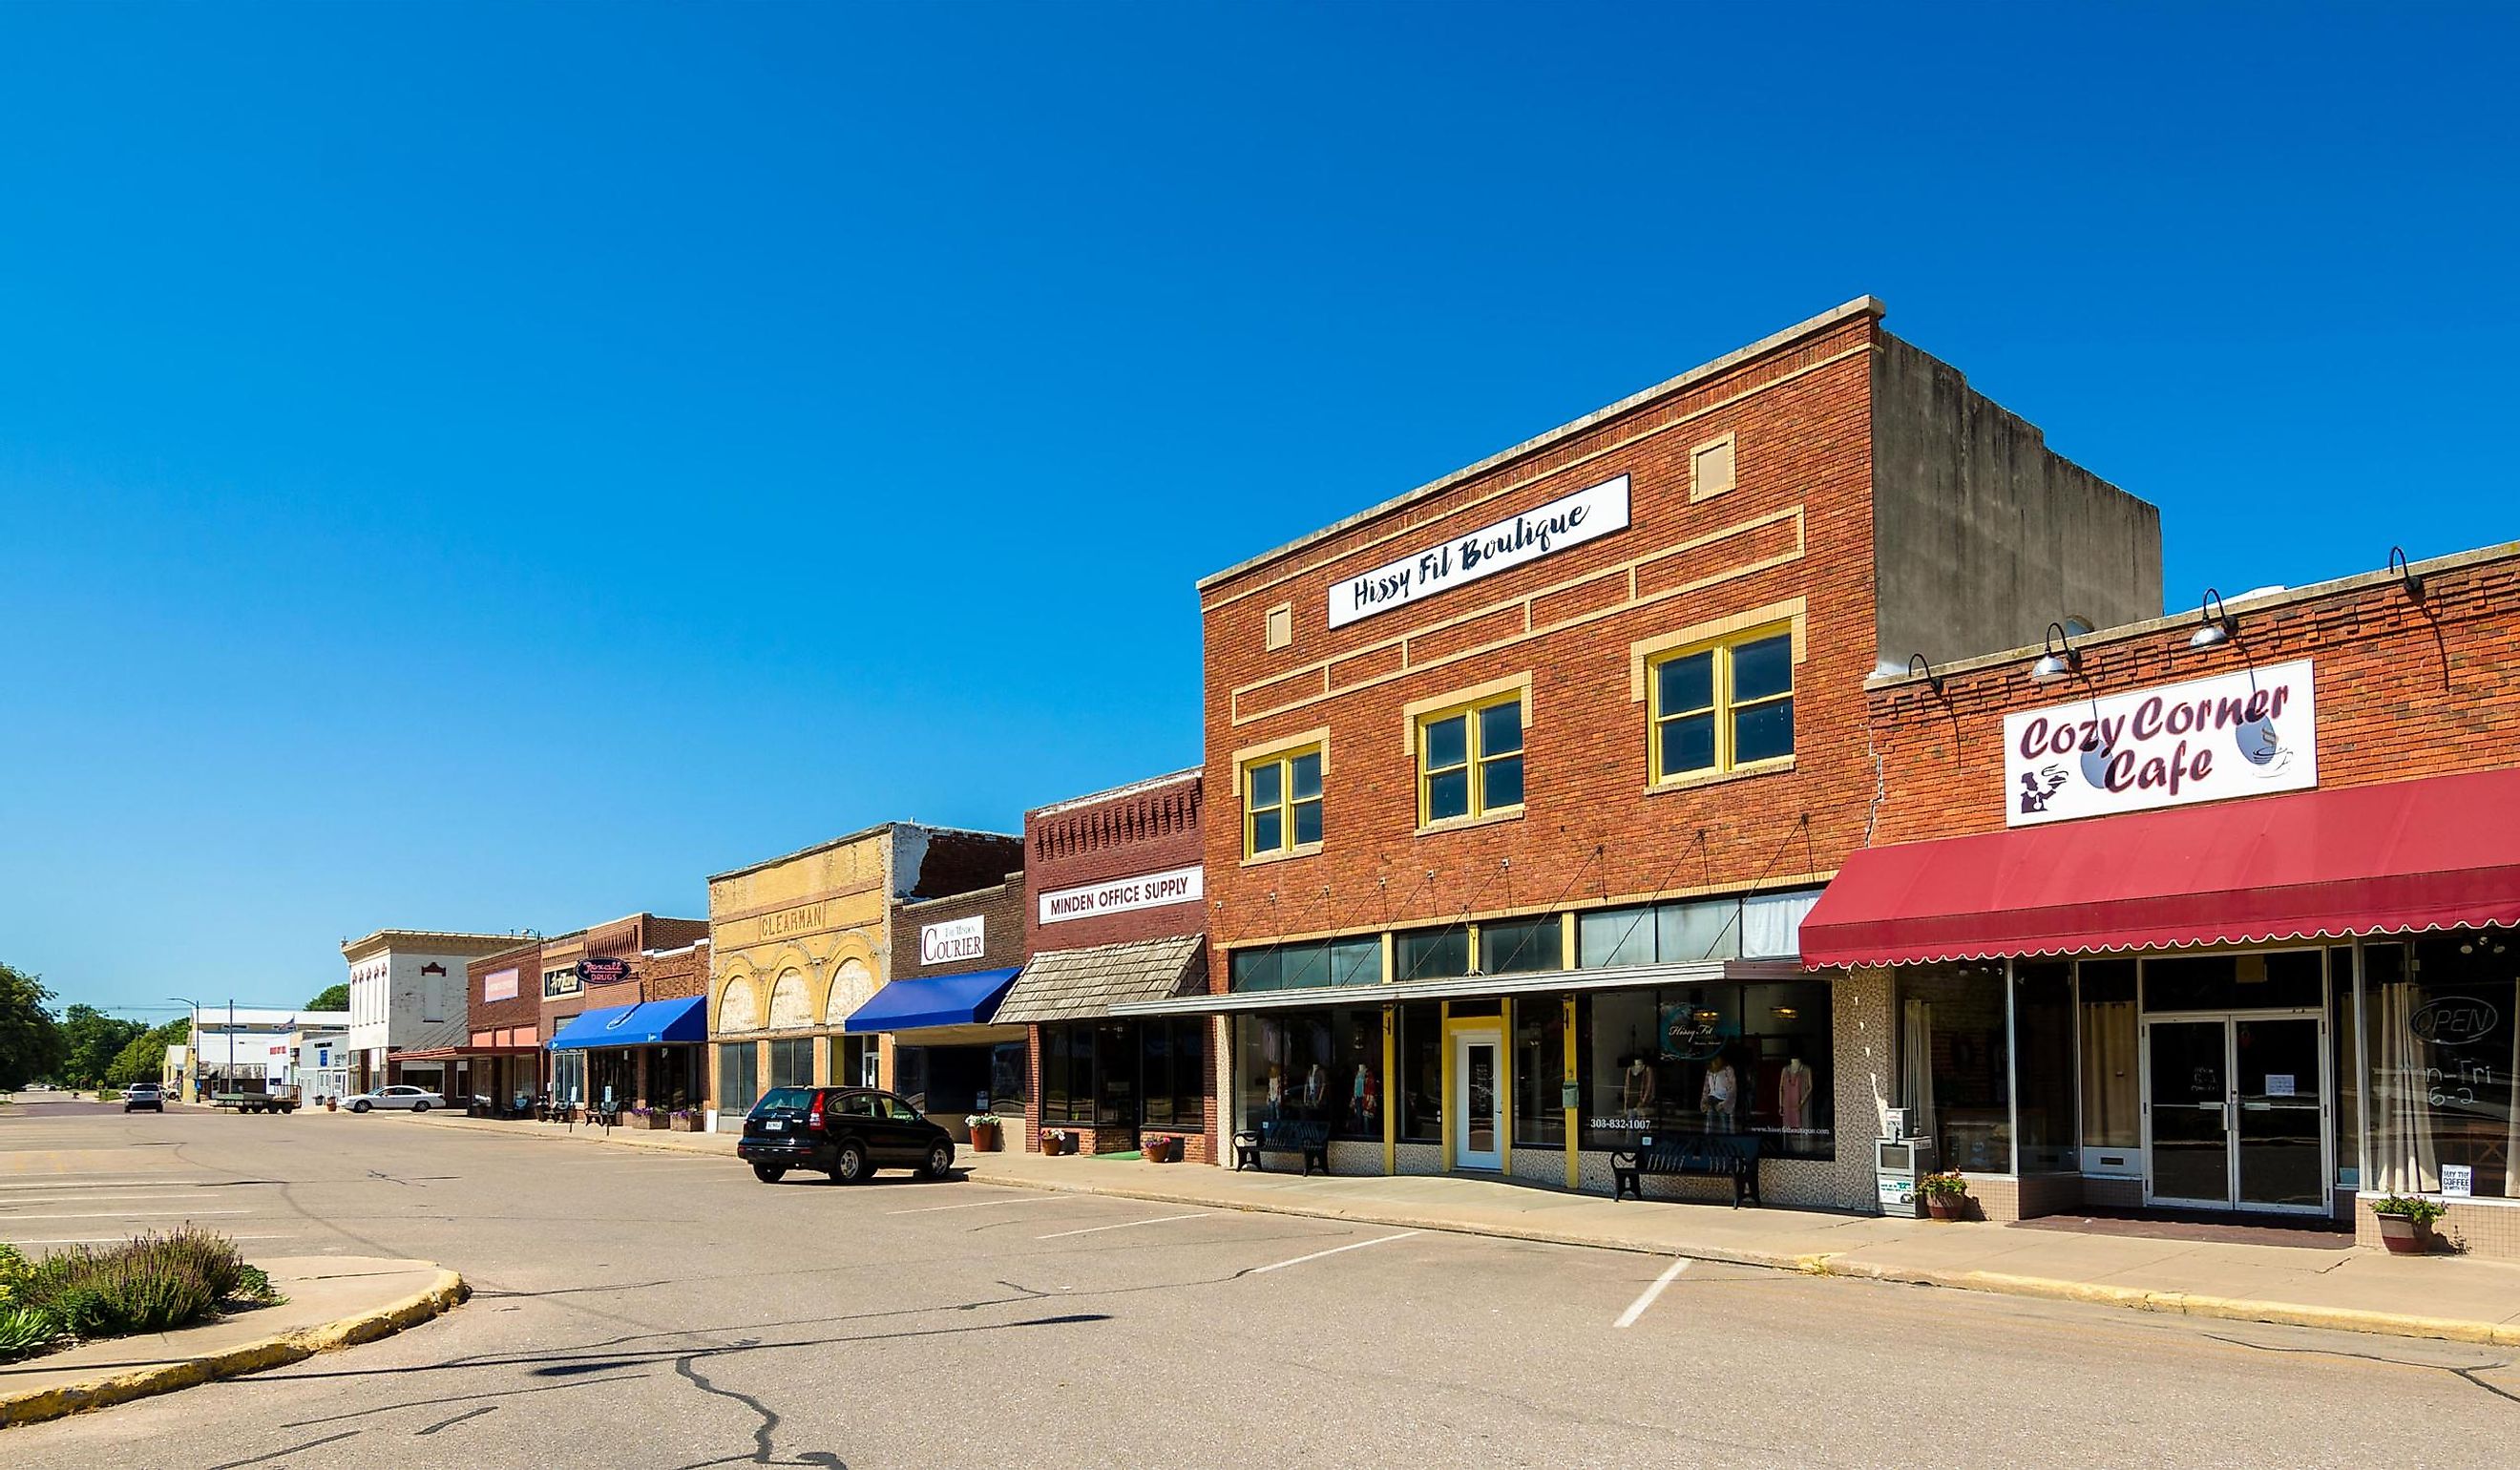 Downtown Minden, Nebraska. In Wikipedia. Image credit: Jared Winkler, CC BY-SA 4.0 <https://creativecommons.org/licenses/by-sa/4.0>, via Wikimedia Commons